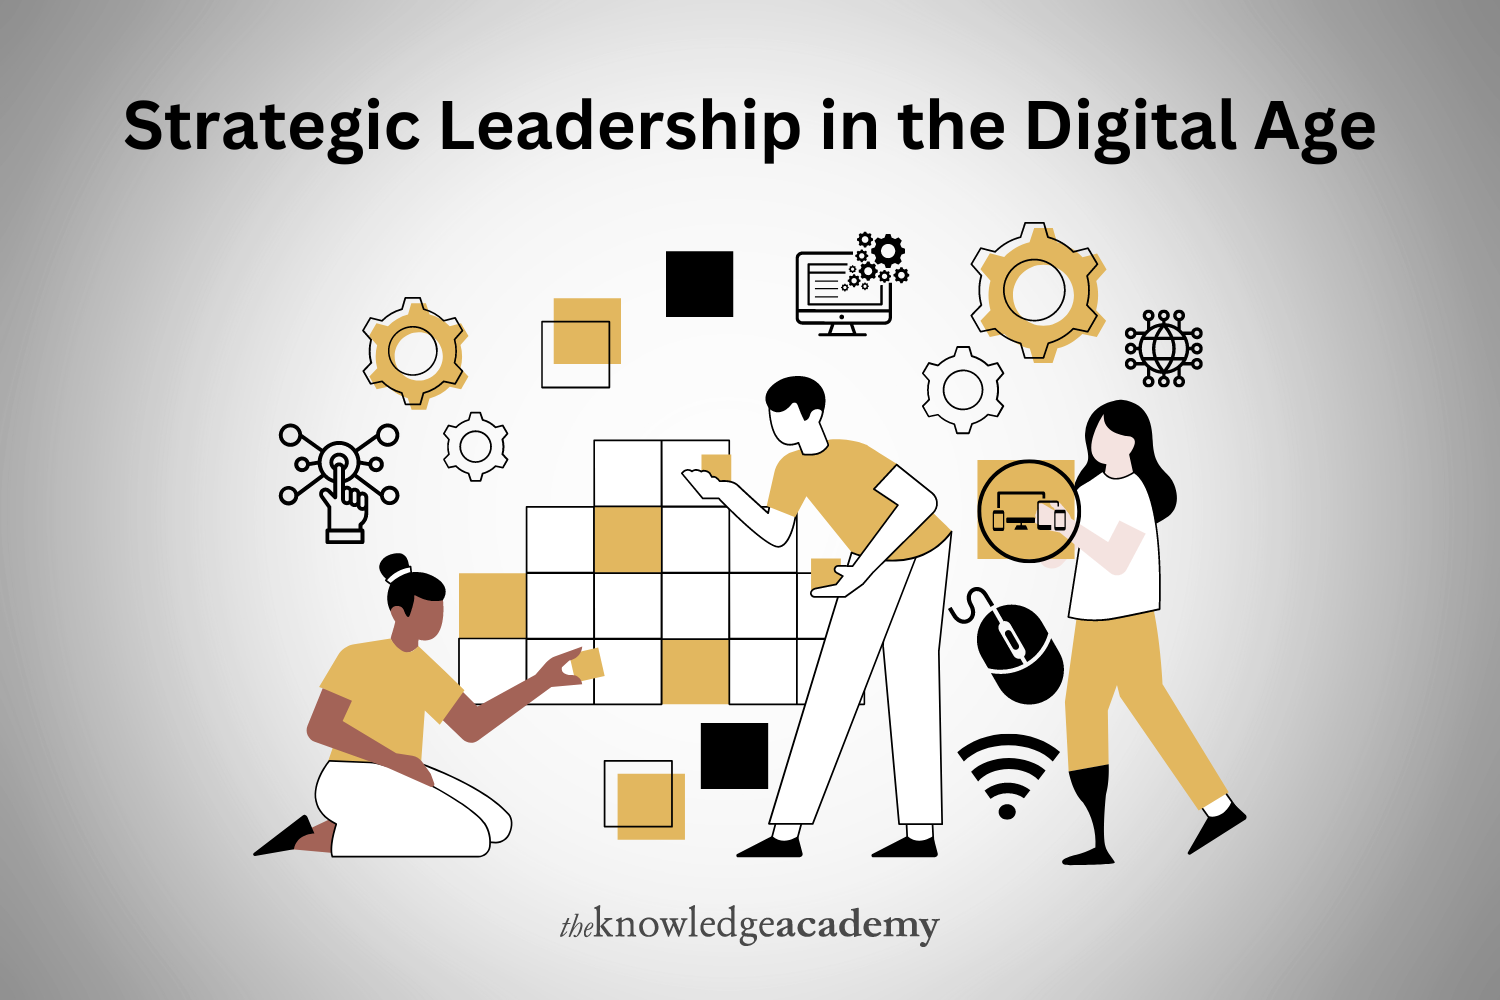 Strategic Management within the Digital Age